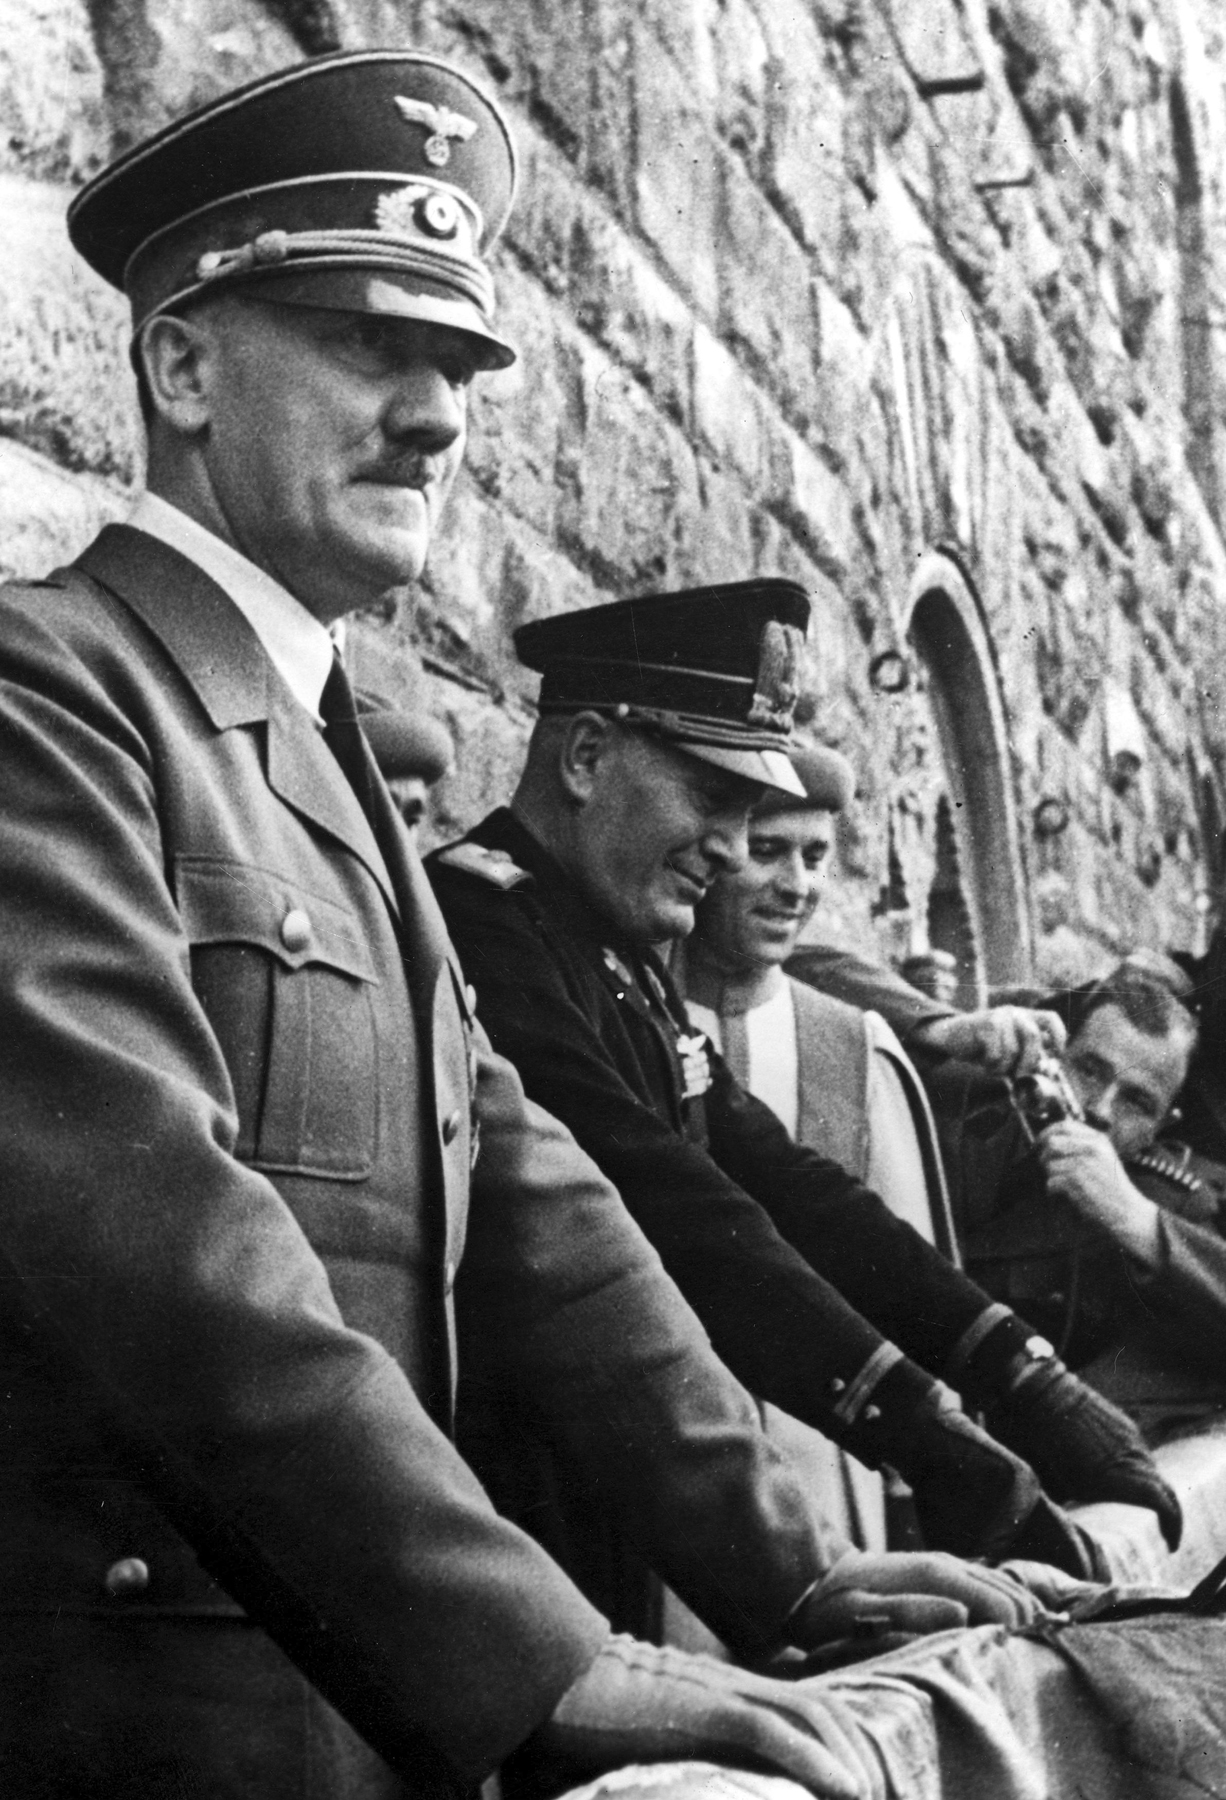 Adolf Hitler in Florenz with Mussolini on the balcony of the Palazzo Vecchio